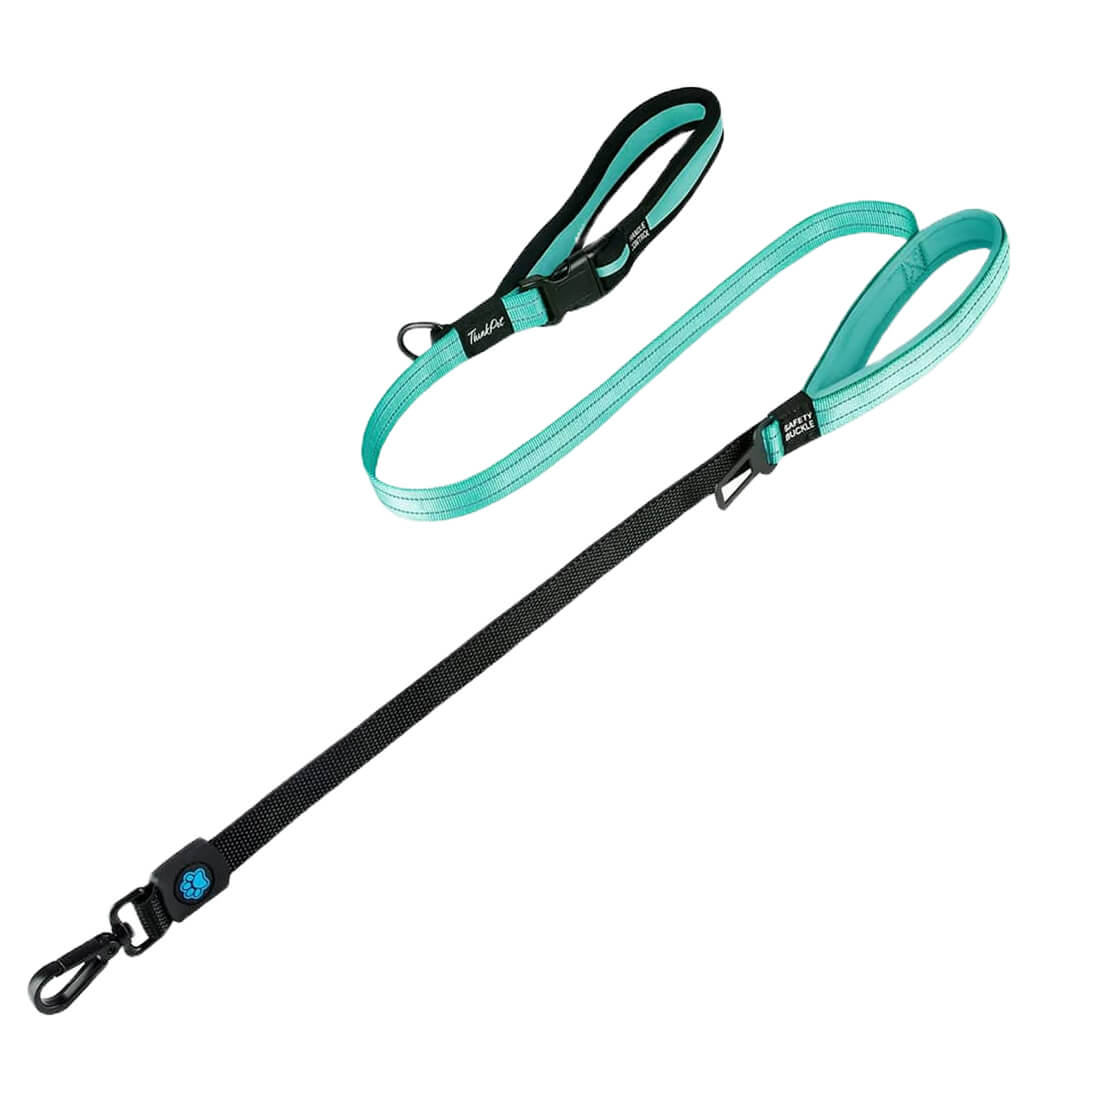 Large Dog Leash - Comfortable Padded Handle With Safety Bucket - 5Ft | ThinkPet